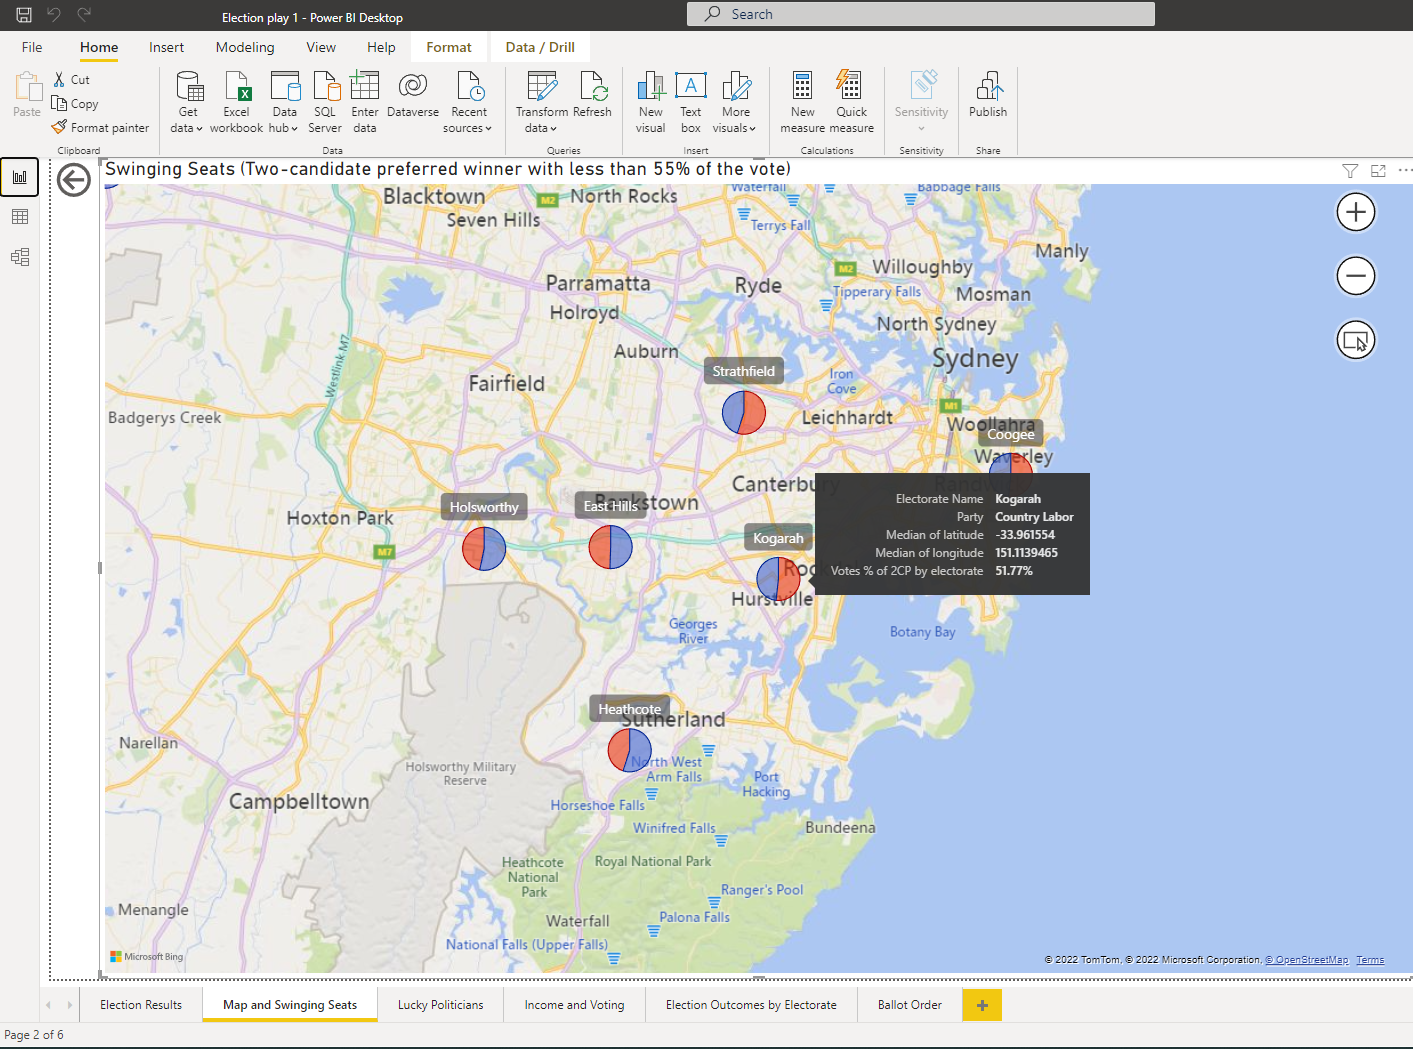 Cover Image for Power BI: Election analysis